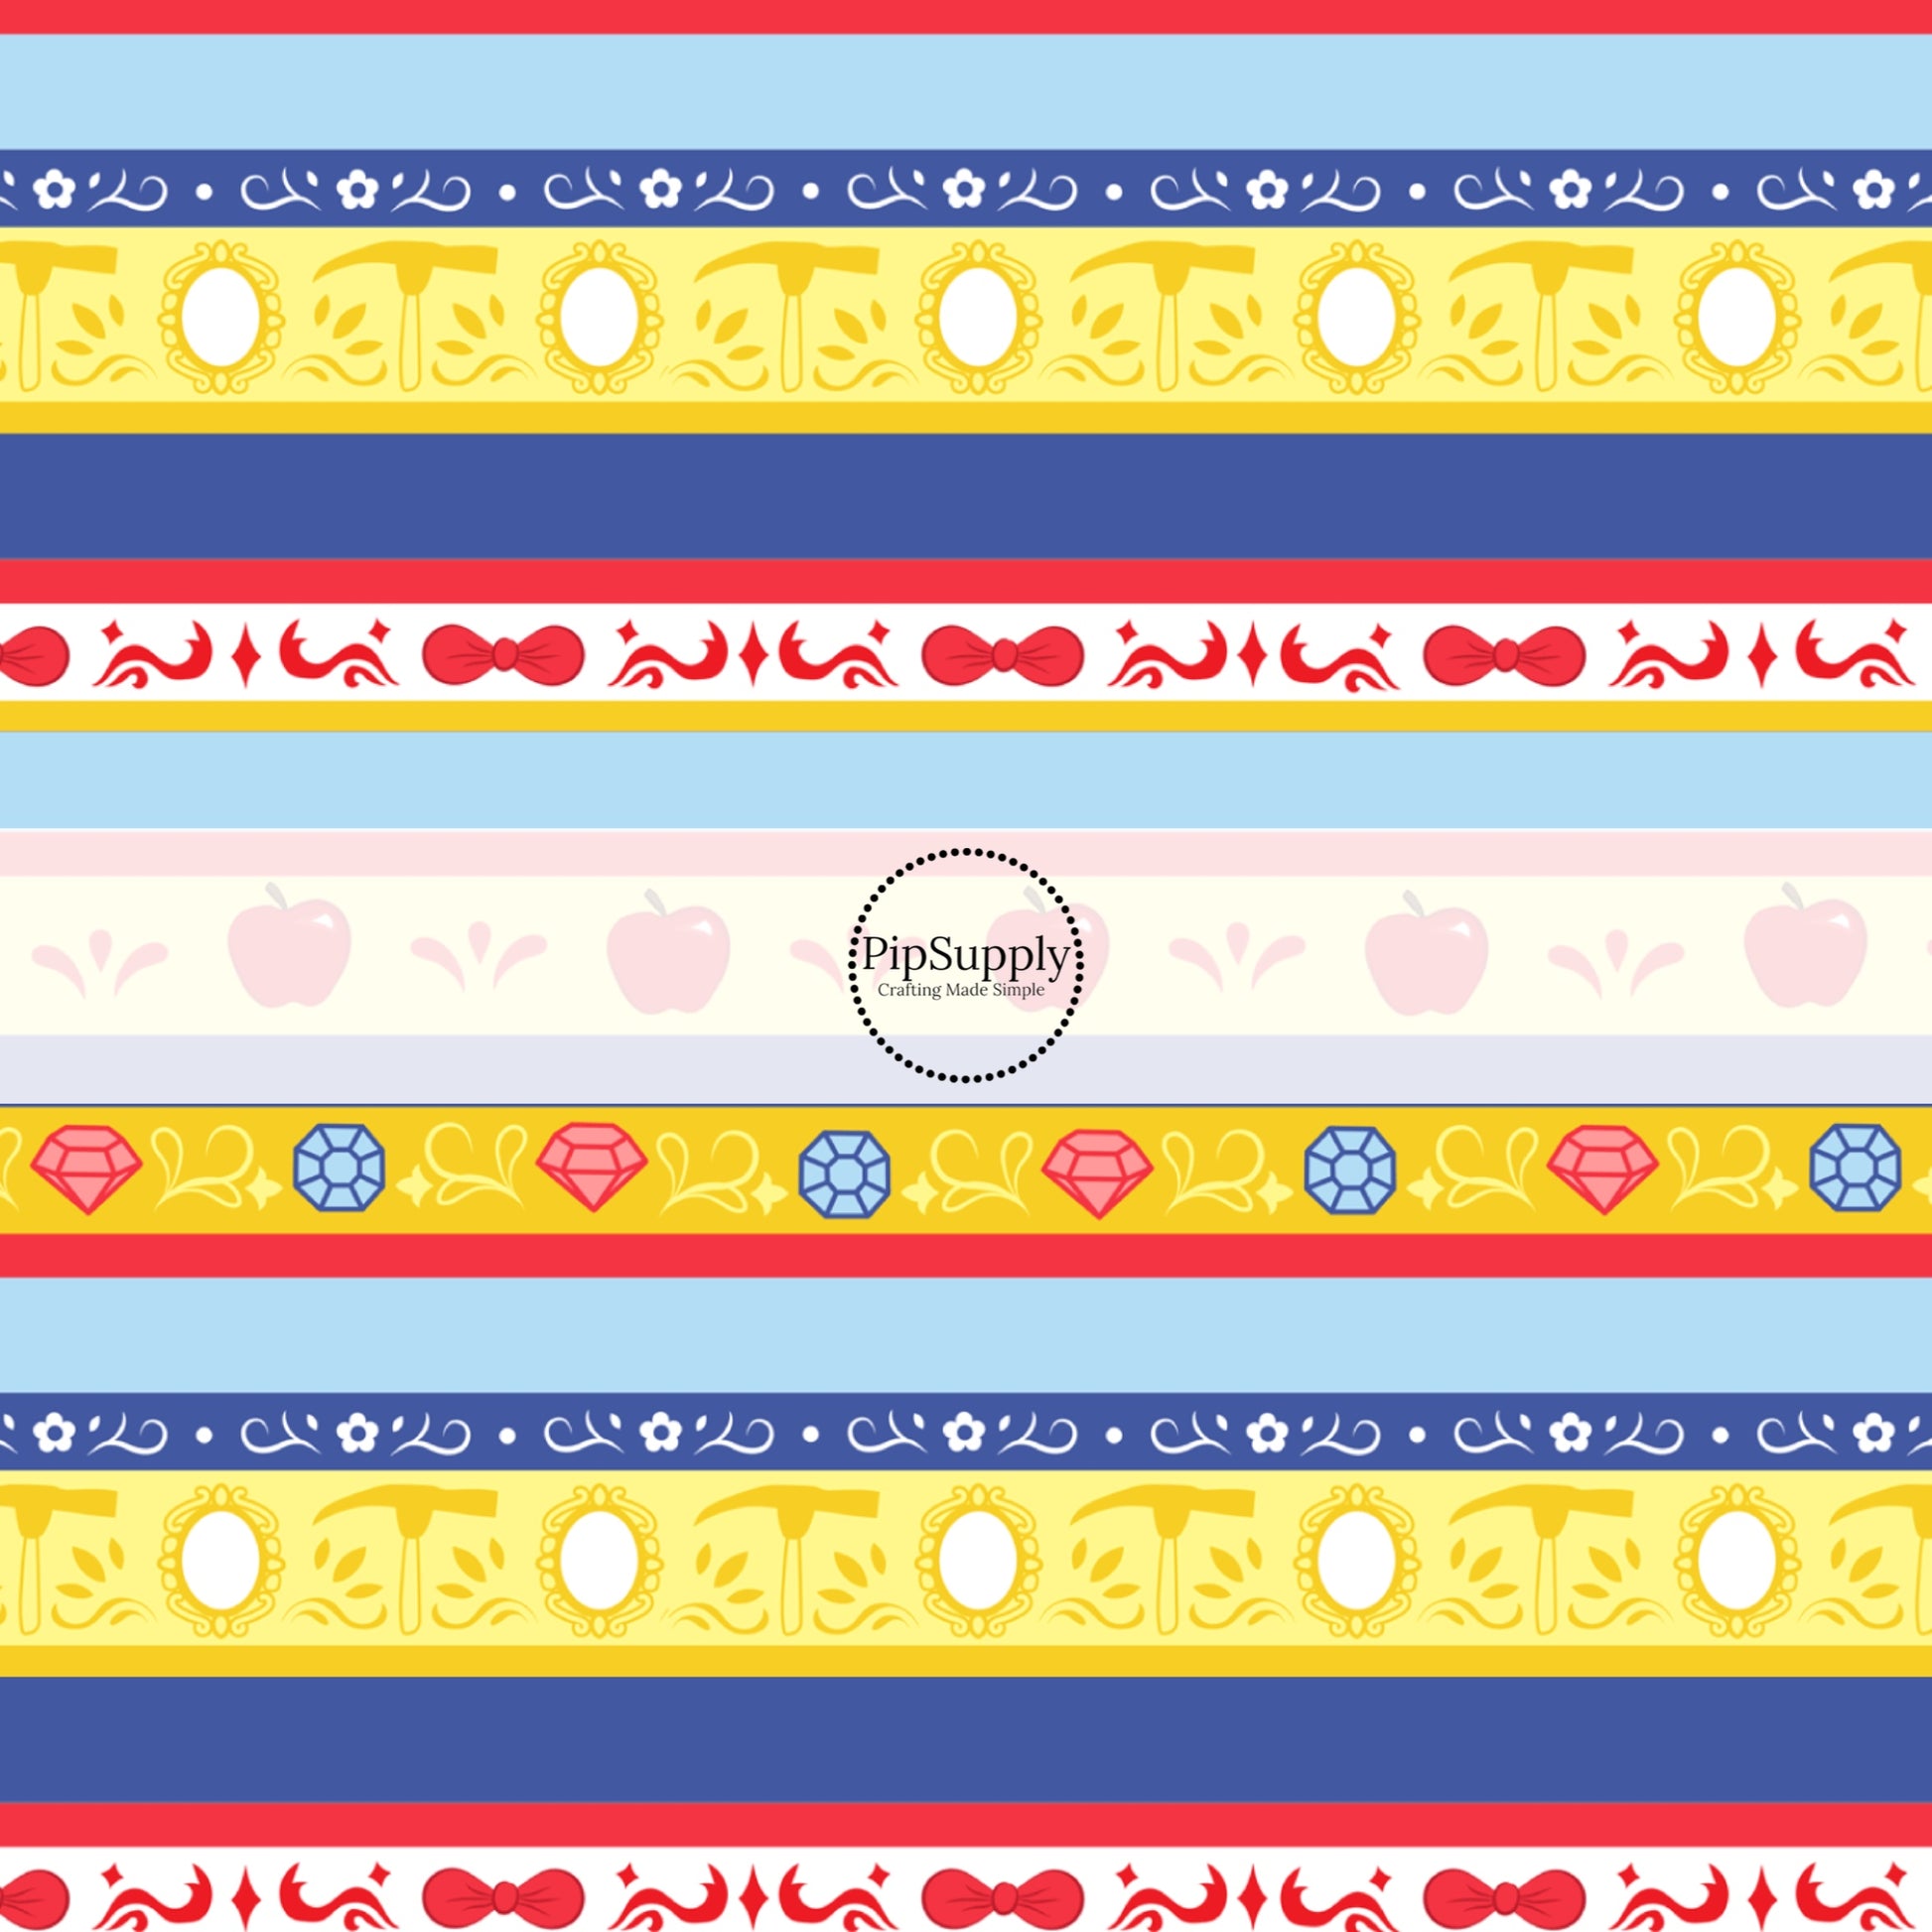 red apples with red bows on yellow red and blue stripes hair bow strips